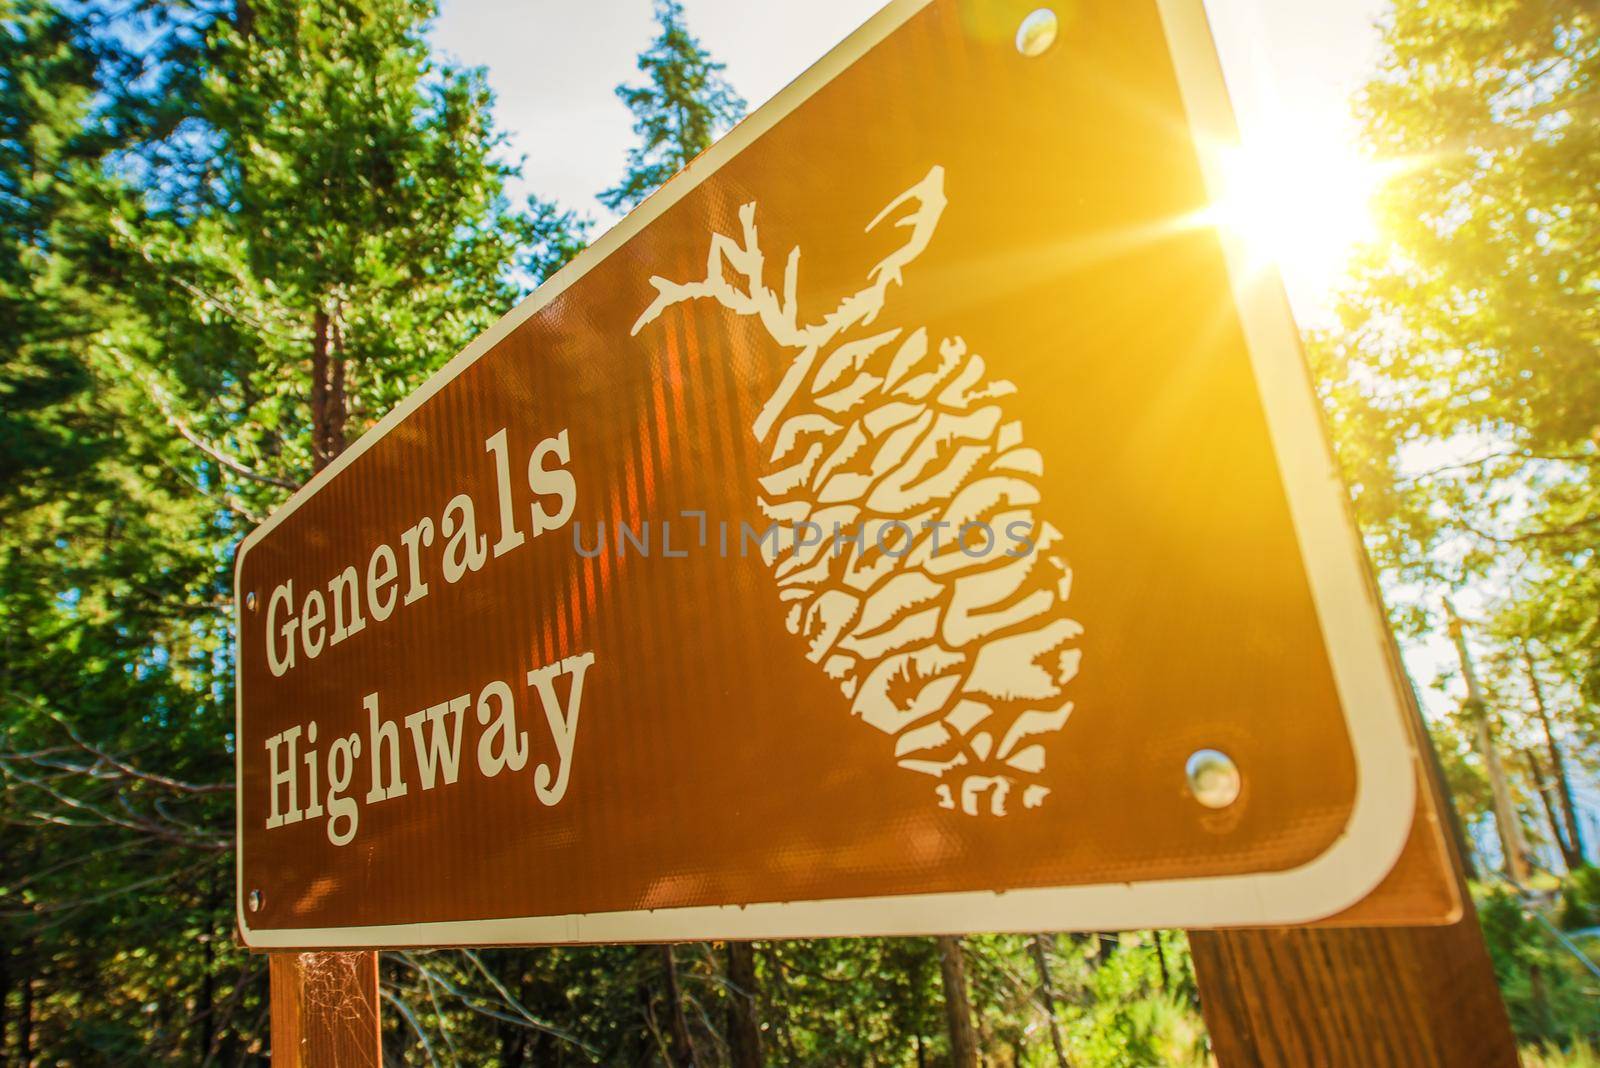 Generals Highway Sign in Sequoia National Park, California, United States. by welcomia